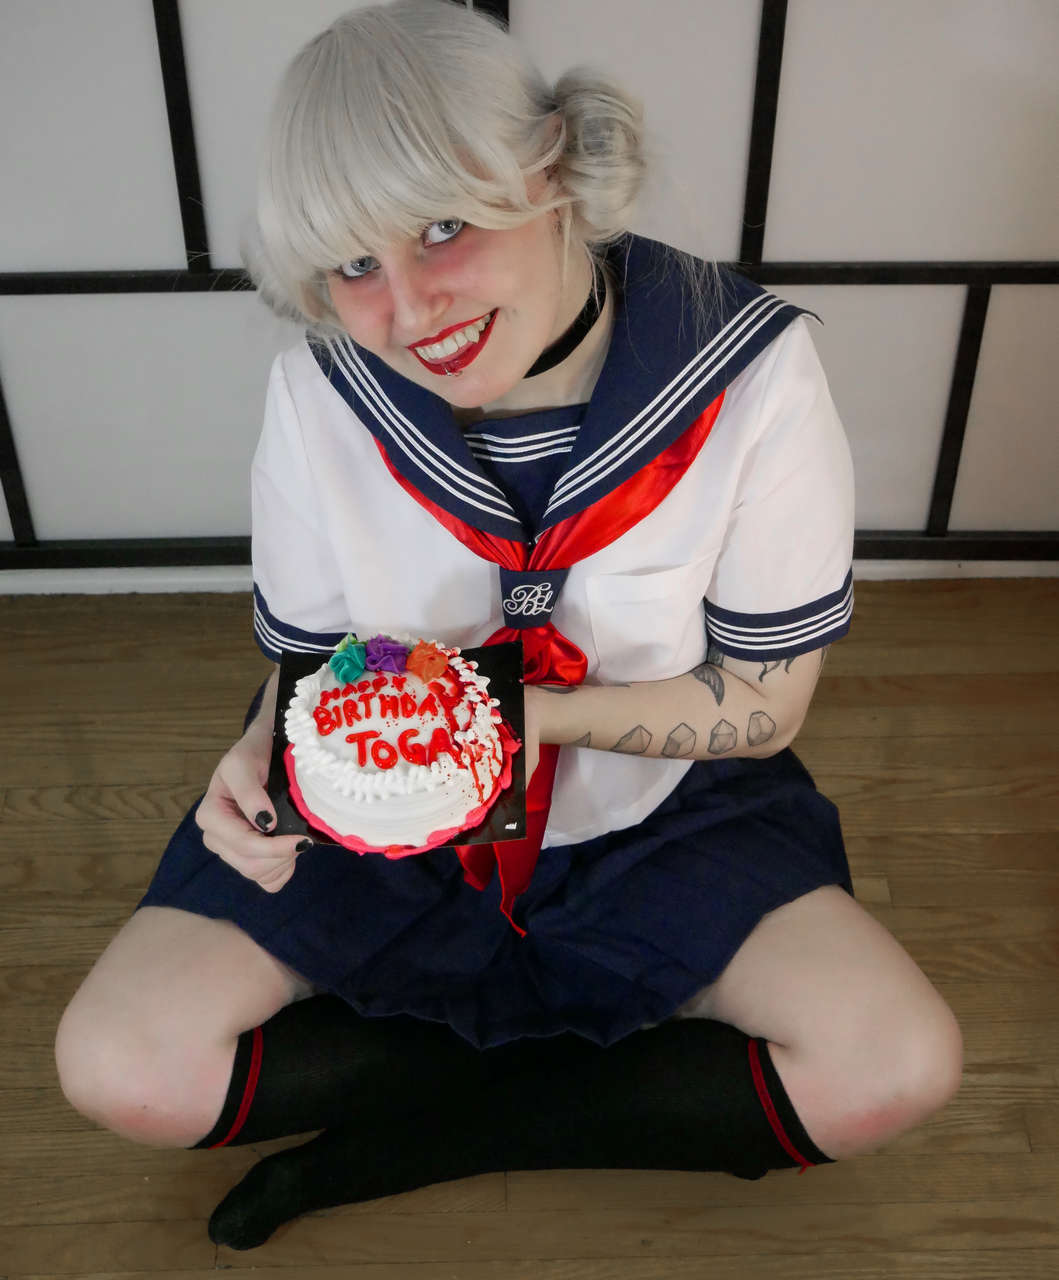 Toga S Birthday Is This Week So I Thought She Should Have A Bit Of Cake To Celebrate Himiko Toga By Azura Ros